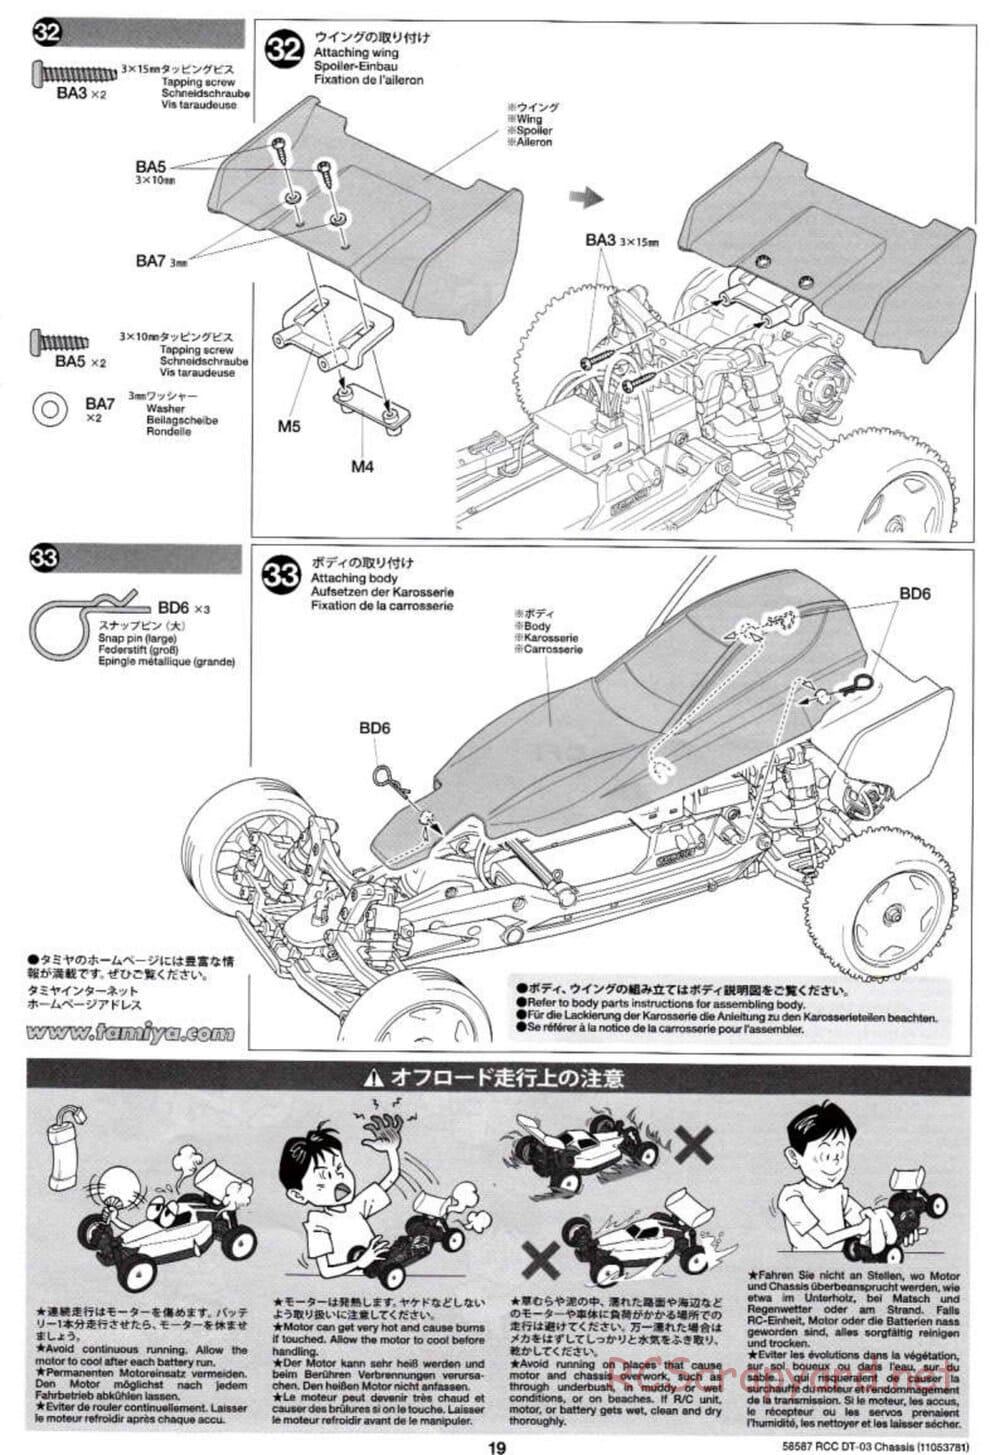 Tamiya - Neo Fighter Buggy Chassis - Manual - Page 19